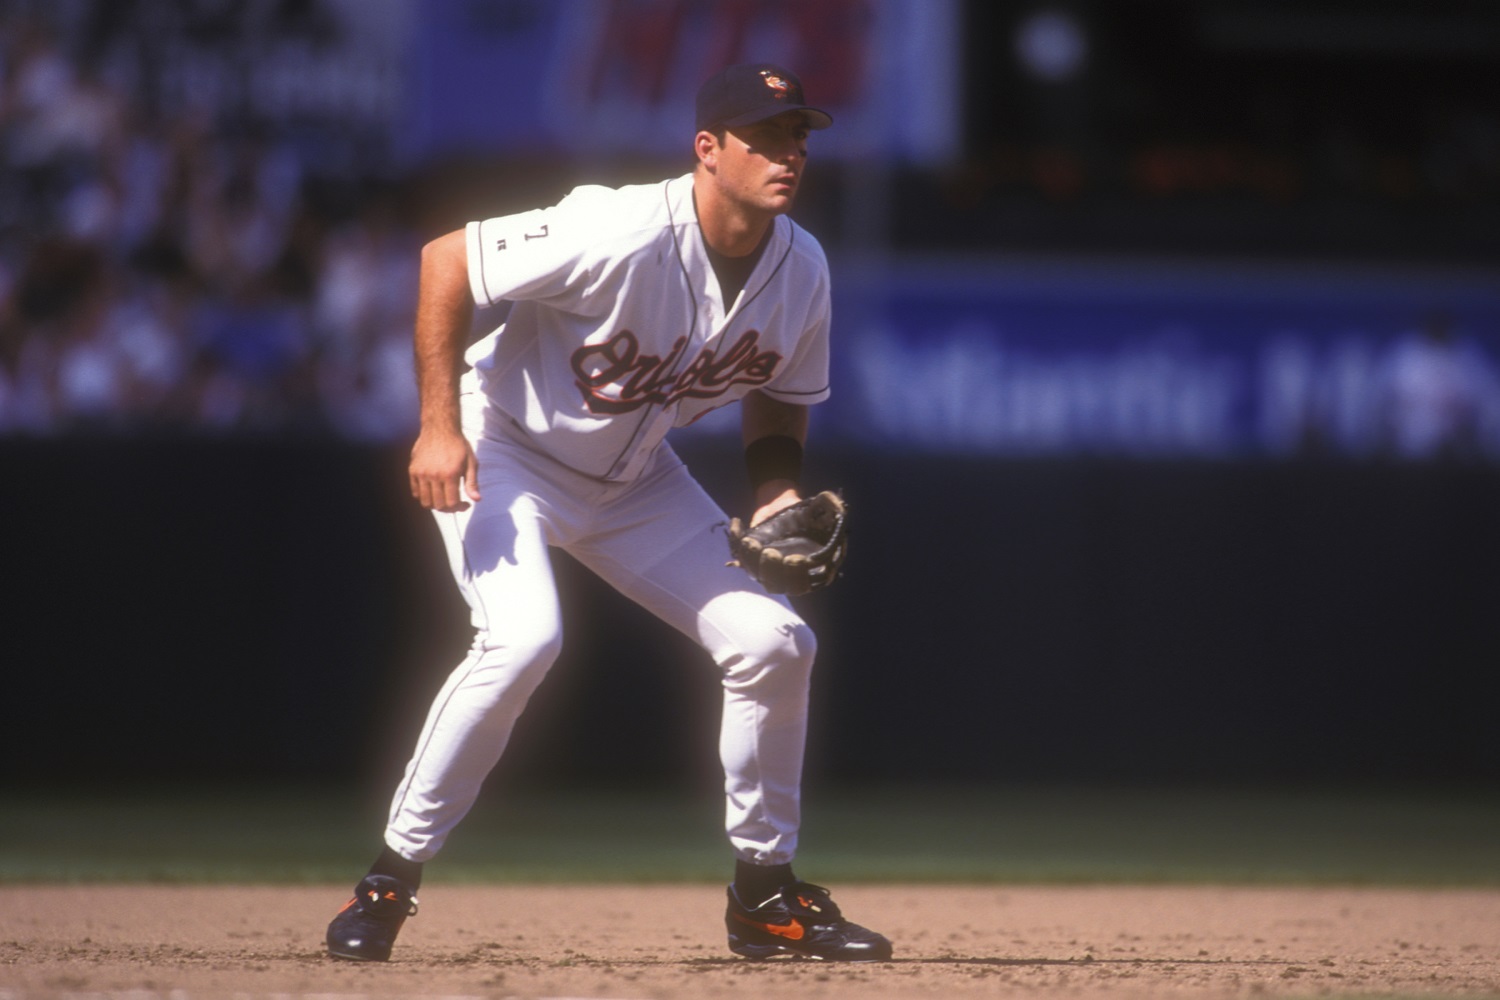 Ryan Minor of the Baltimore Orioles in position during a game against the Minnesota Twins on Aug. 19, 1999, at Camden Yards in Baltimore. | Mitchell Layton/Getty Images